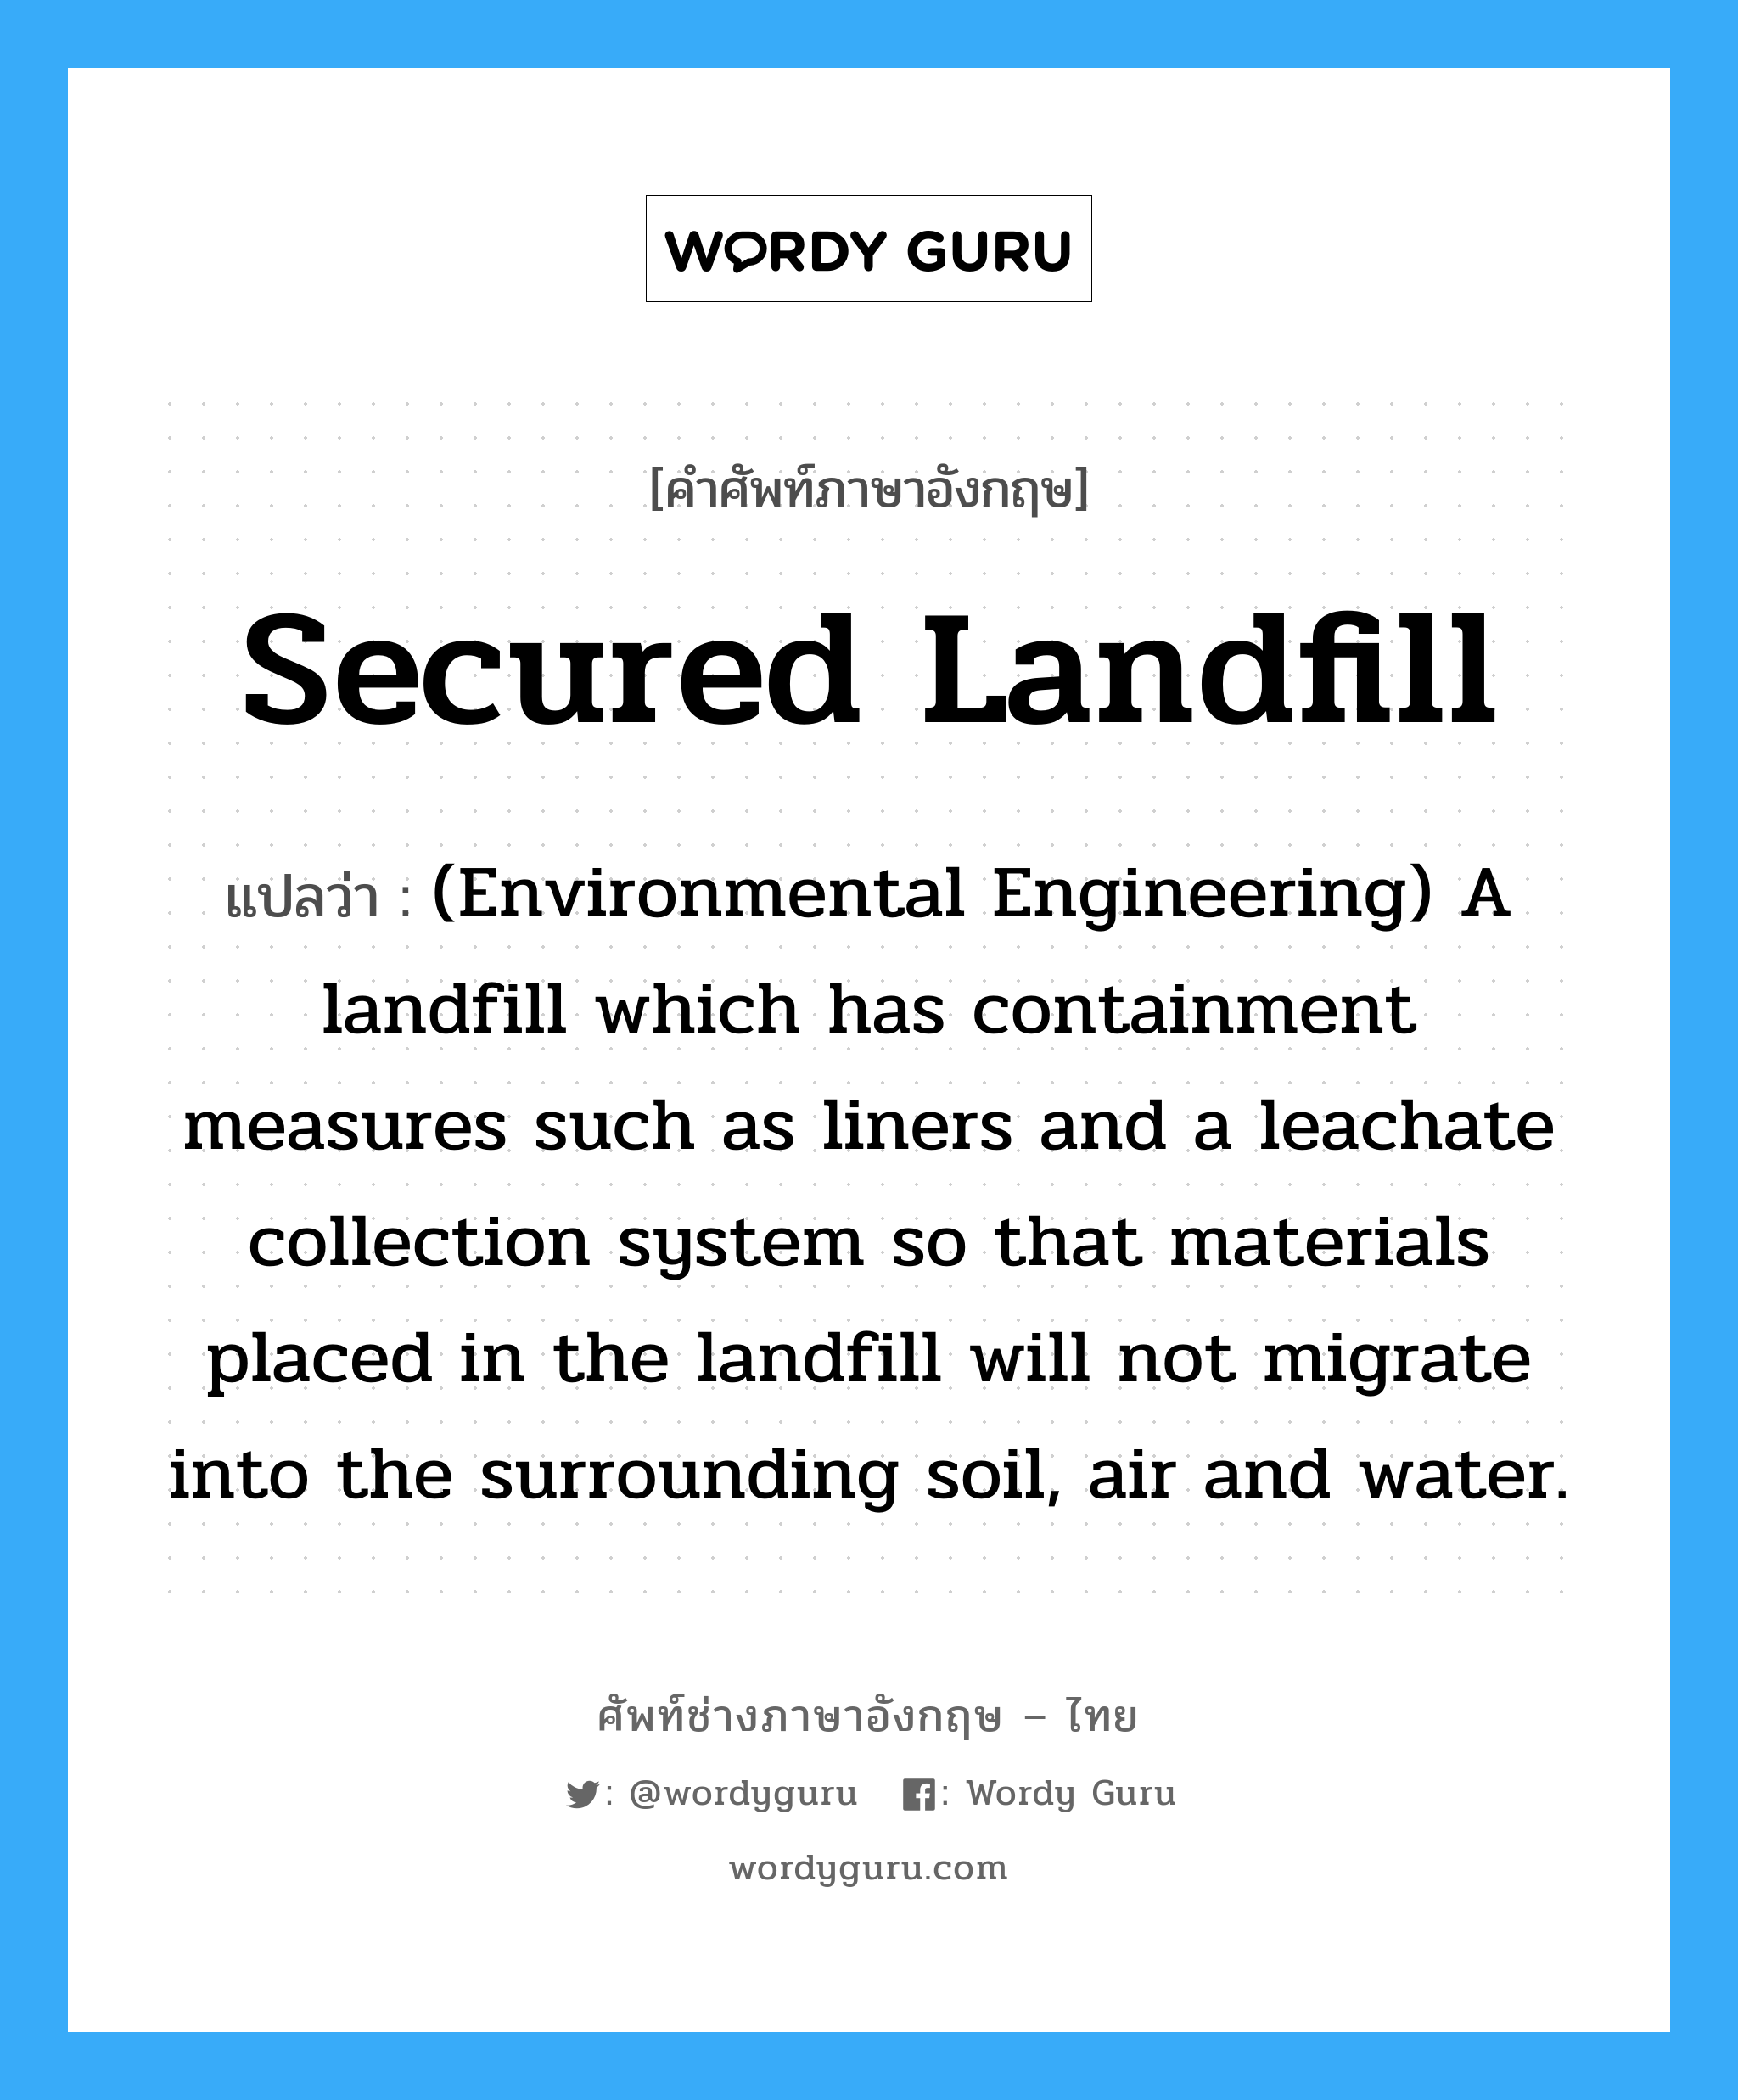 (Environmental Engineering) A landfill which has containment measures such as liners and a leachate collection system so that materials placed in the landfill will not migrate into the surrounding soil, air and water. ภาษาอังกฤษ?, คำศัพท์ช่างภาษาอังกฤษ - ไทย (Environmental Engineering) A landfill which has containment measures such as liners and a leachate collection system so that materials placed in the landfill will not migrate into the surrounding soil, air and water. คำศัพท์ภาษาอังกฤษ (Environmental Engineering) A landfill which has containment measures such as liners and a leachate collection system so that materials placed in the landfill will not migrate into the surrounding soil, air and water. แปลว่า Secured landfill